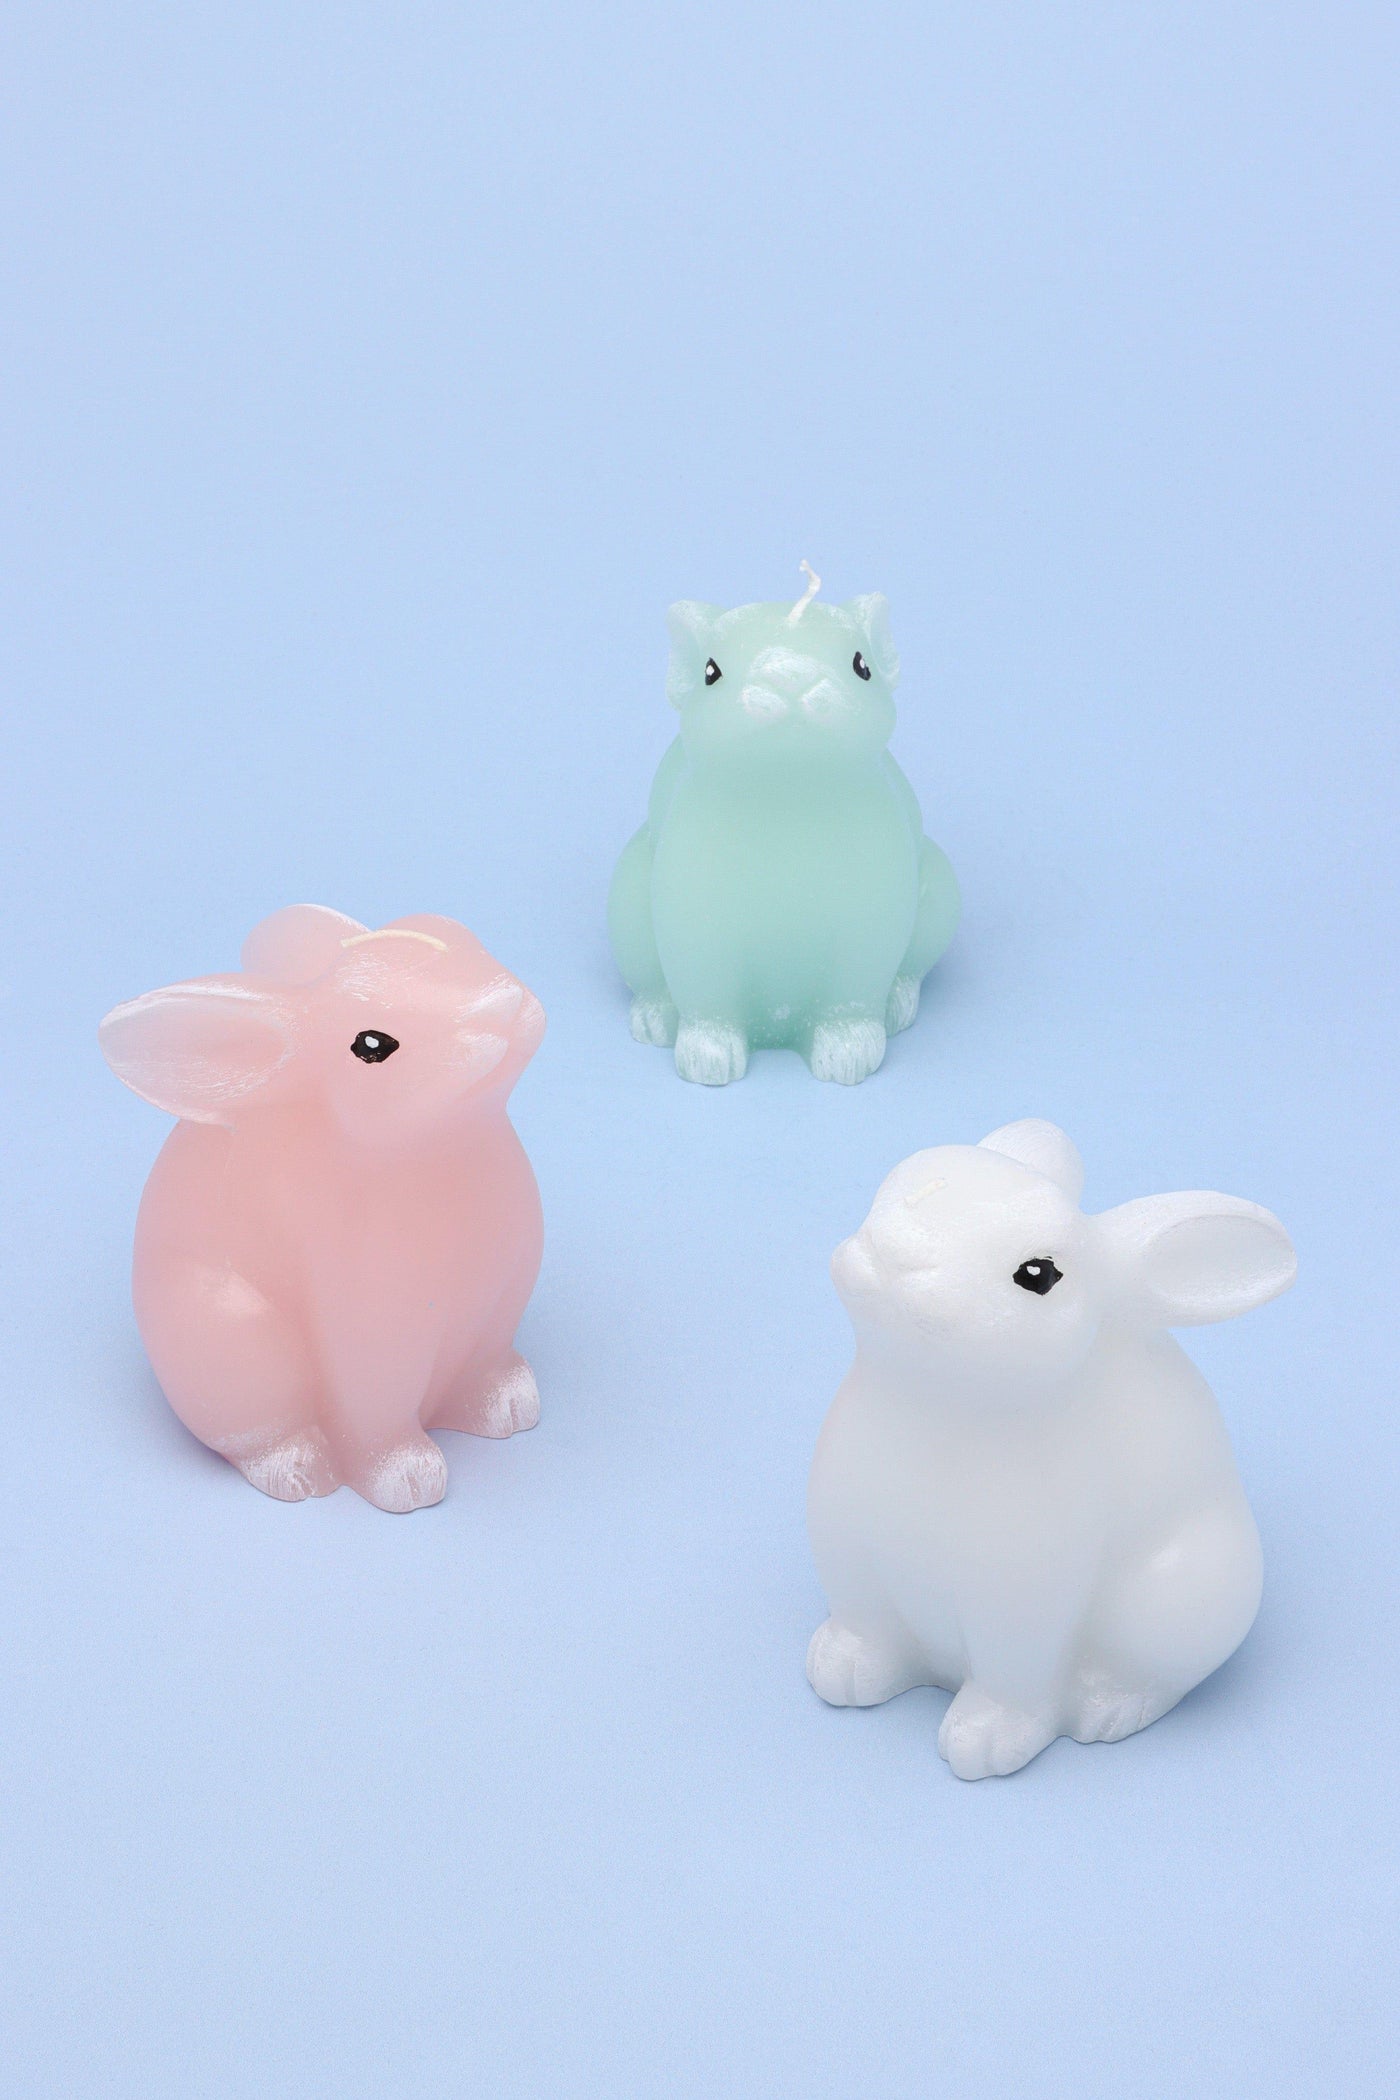 G Decor Candles Set of 3 Scented Alfie Cute Easter Bunny 3D Candles